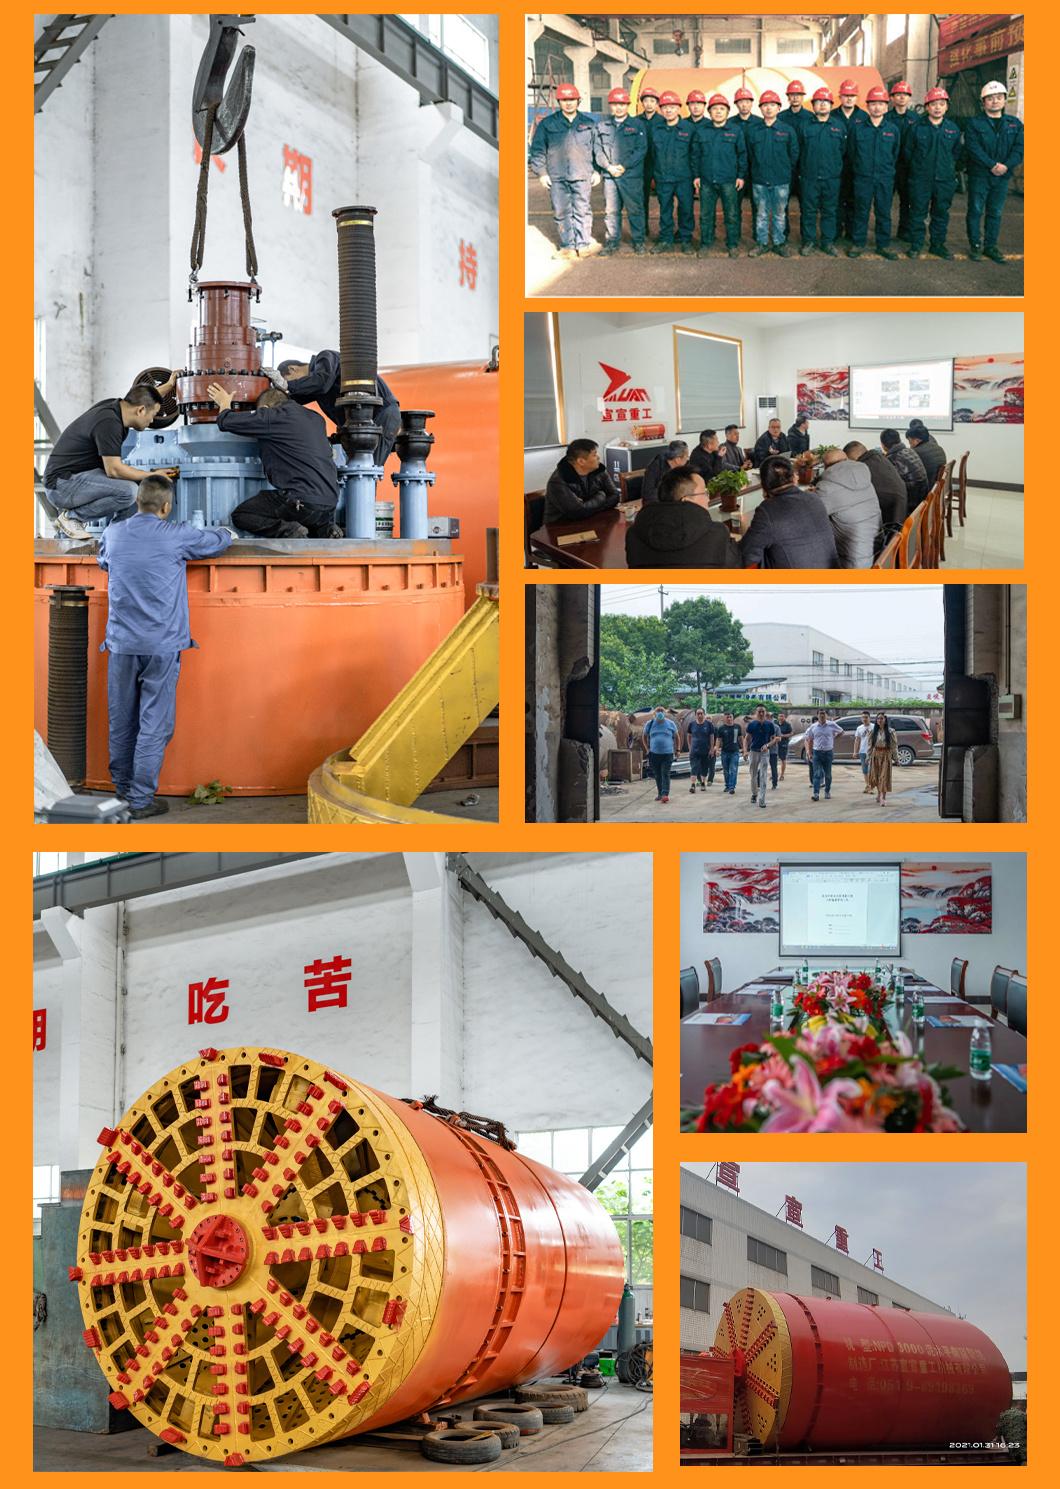 Professional High Quality Trenchless Project Ysd3000 Rock Pipe Jacking Machine for Rcc